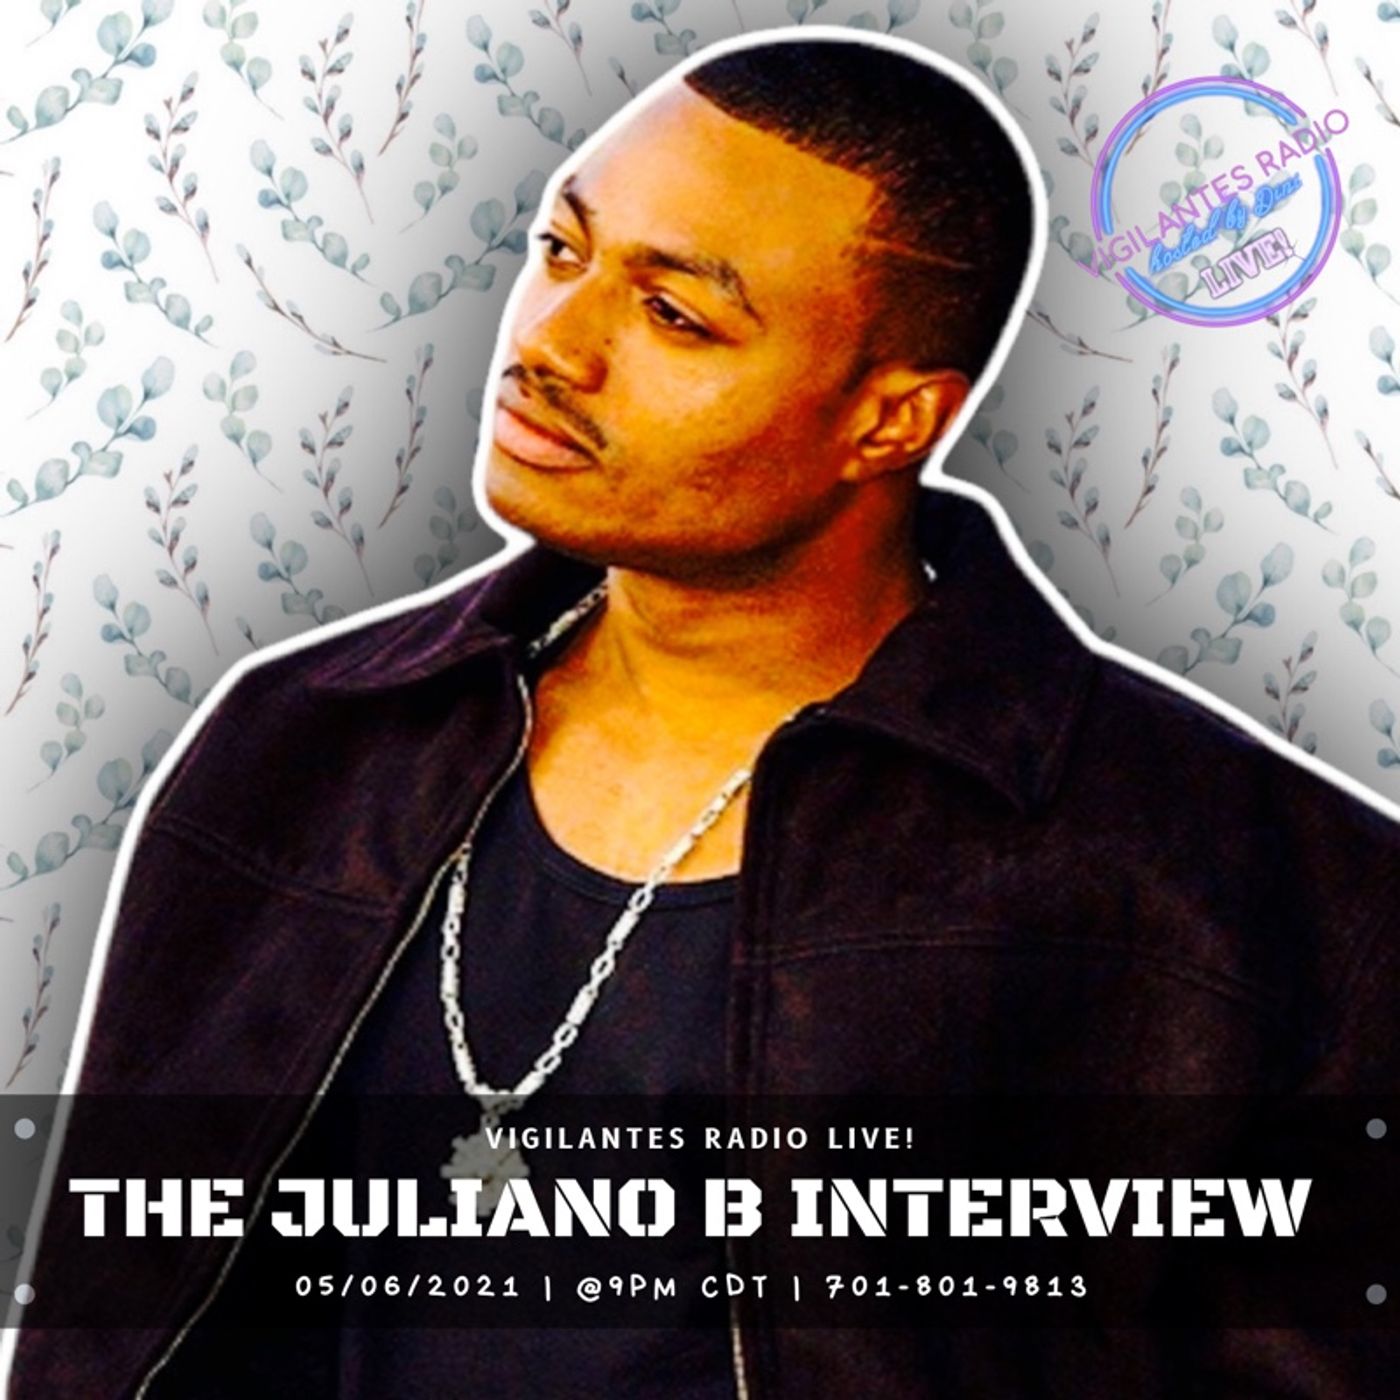 The Juliano B Interview. Image